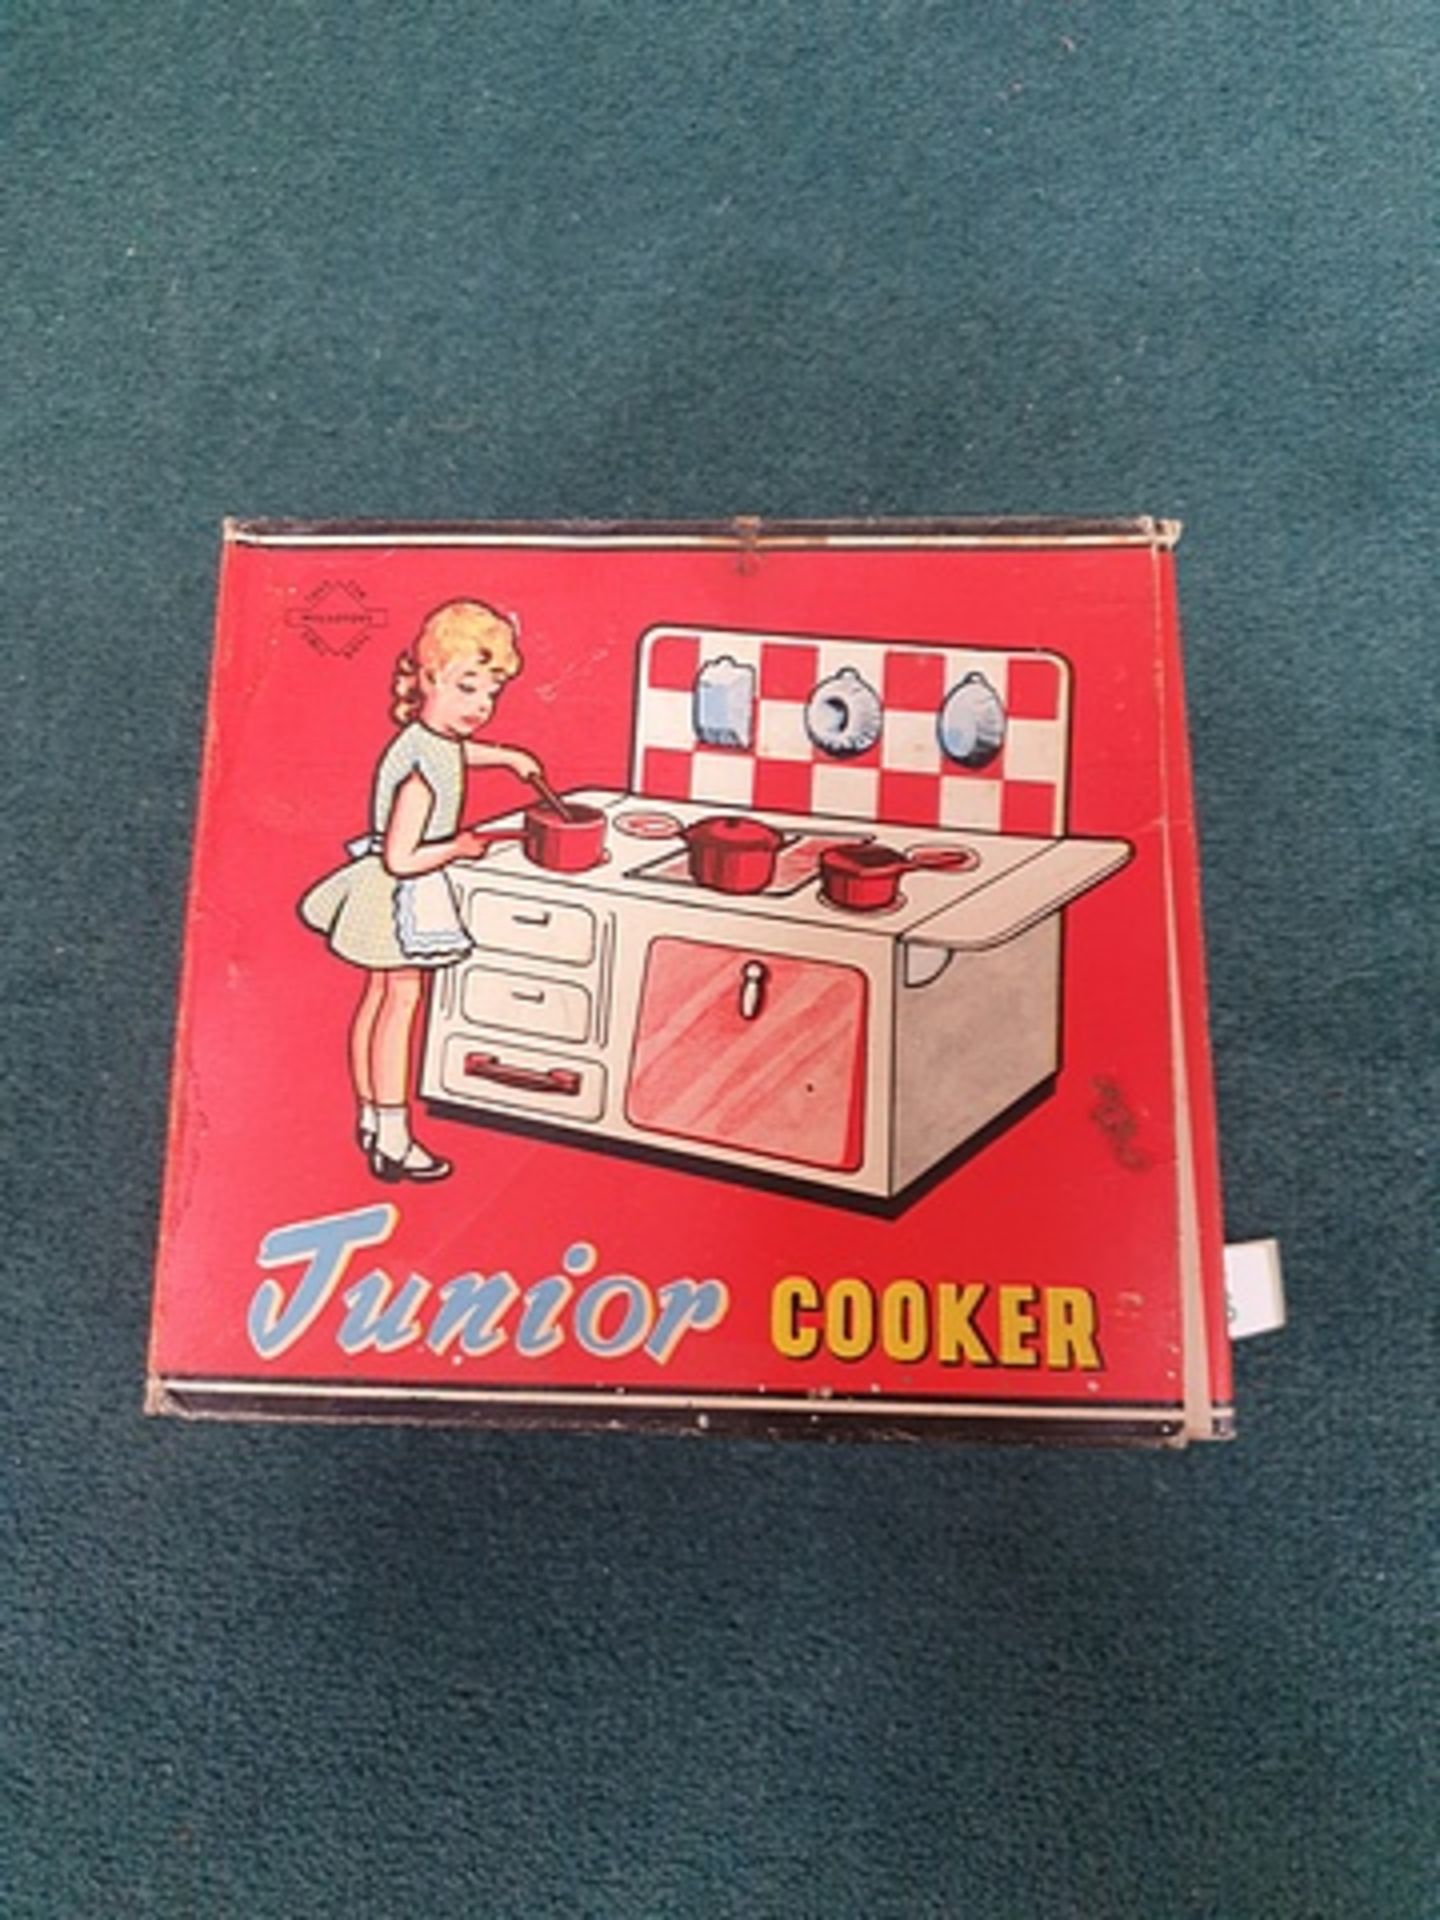 Wells Brimtoy Junior Cooker Model 221 With Accessories Circa 1950s Complete With Box - Image 2 of 2